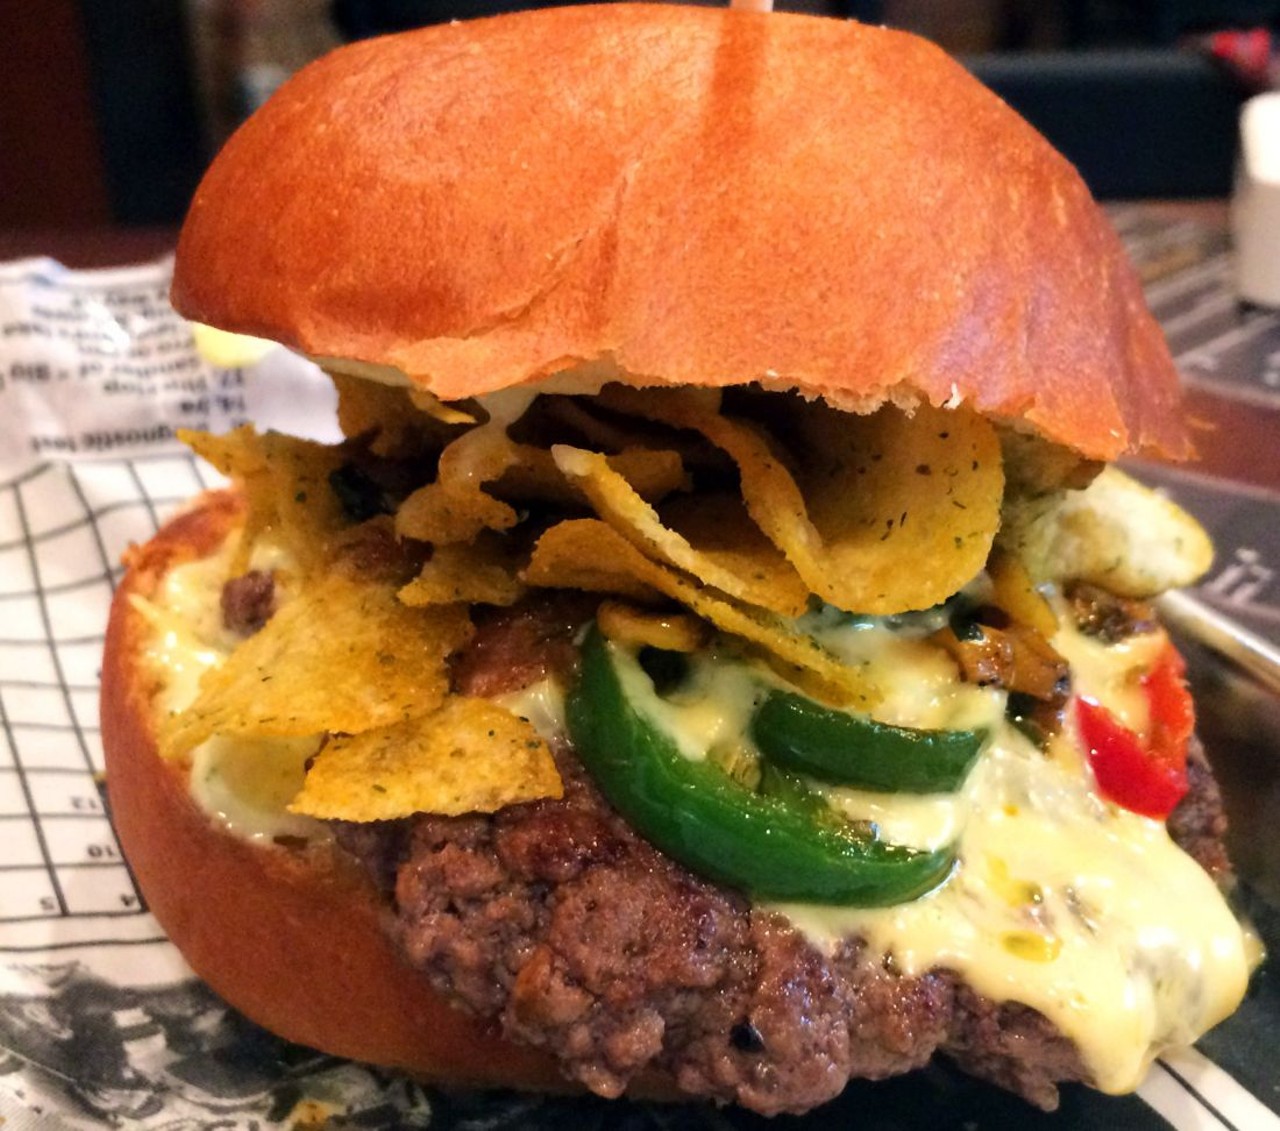 "The Kruncher" with roasted green chile queso, southwest corn relish, cajun aioli, and Kruncher jalapeno potato chips.